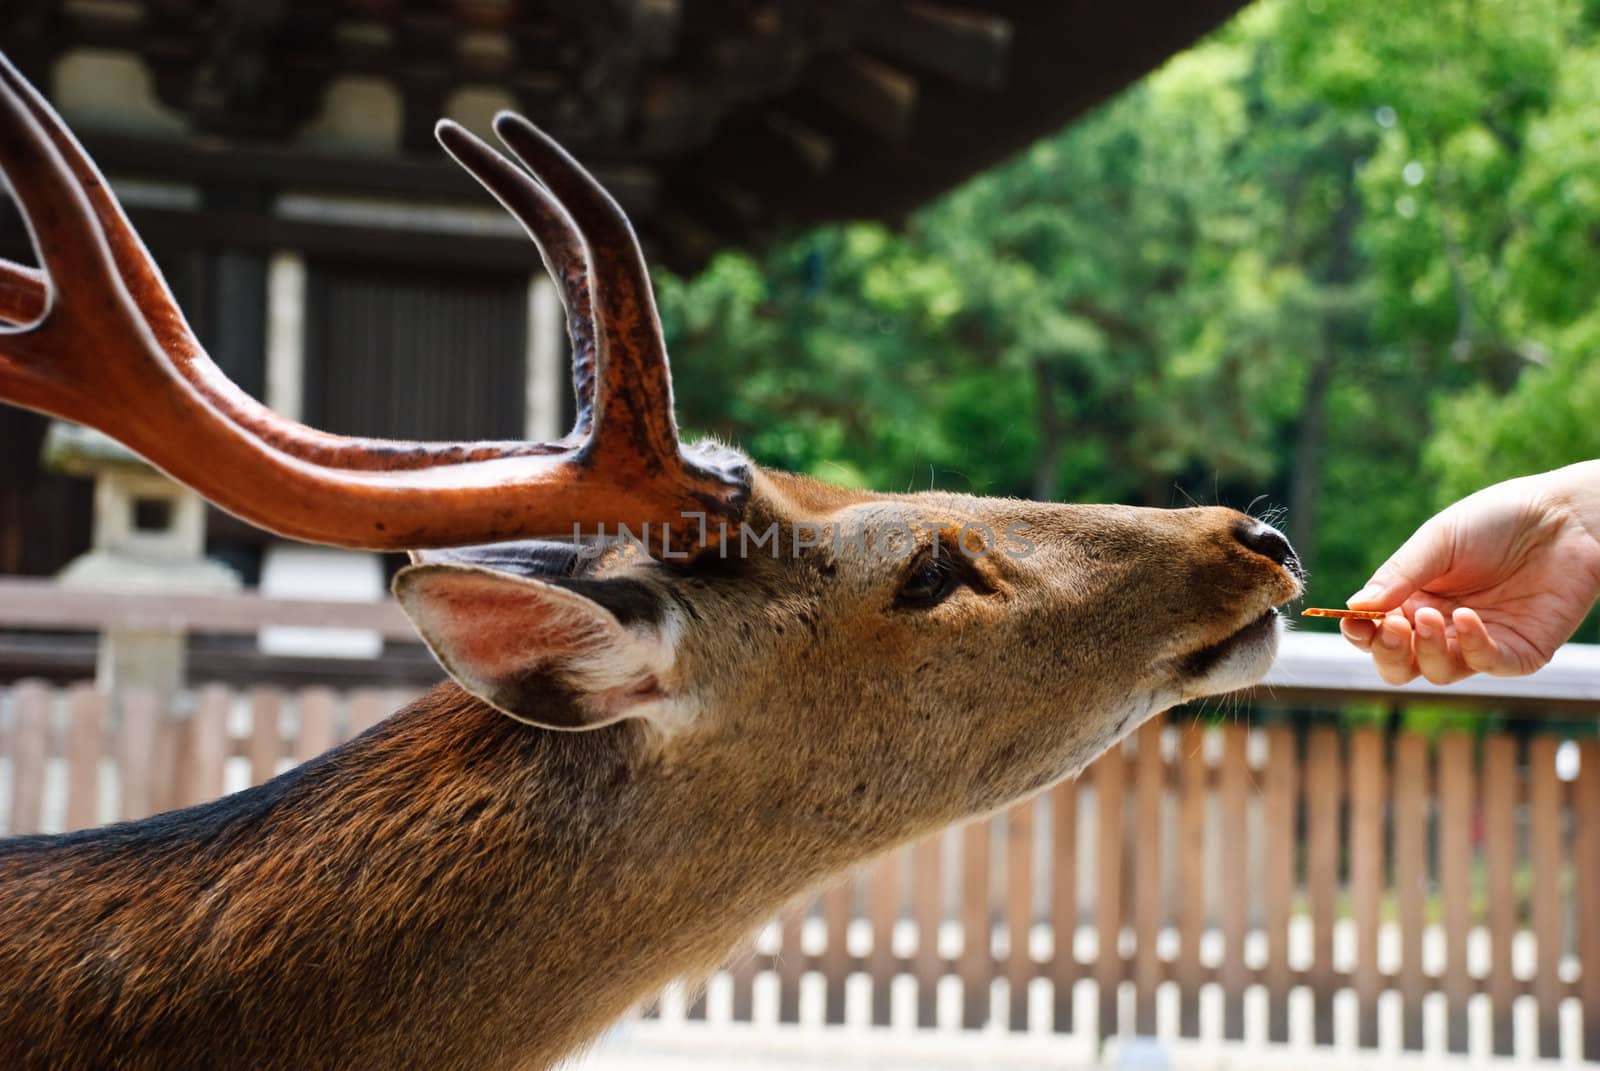 Deer eating from a human hand by 300pixel